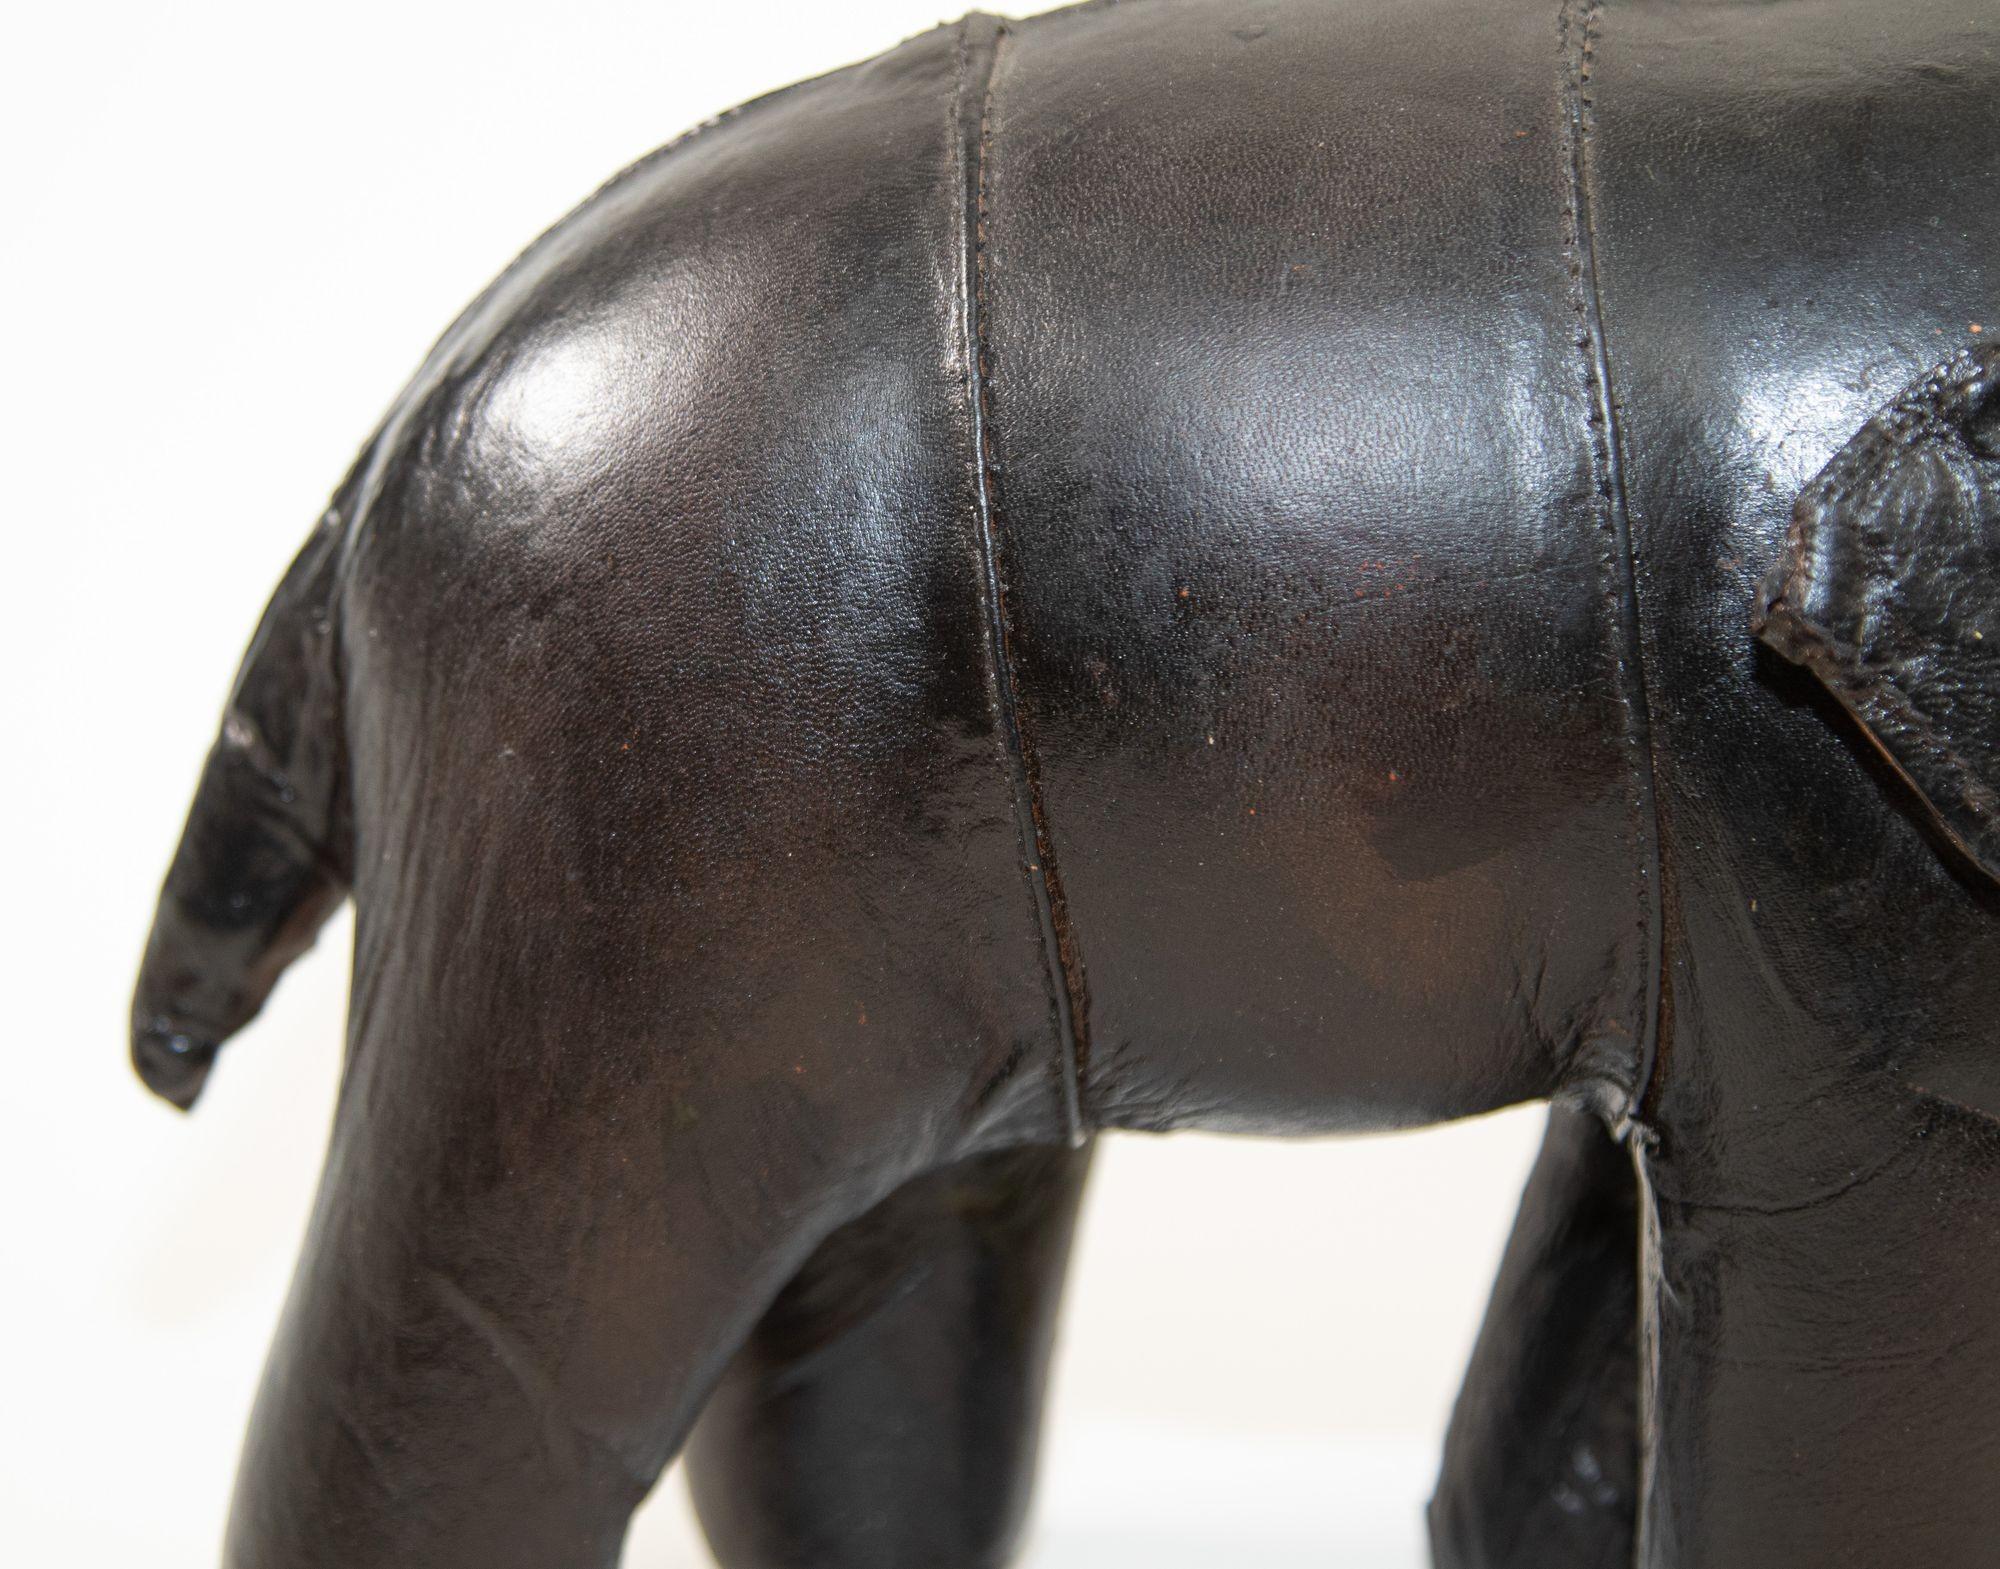 Indian Black Leather Stuffed Elephant Toy For Sale